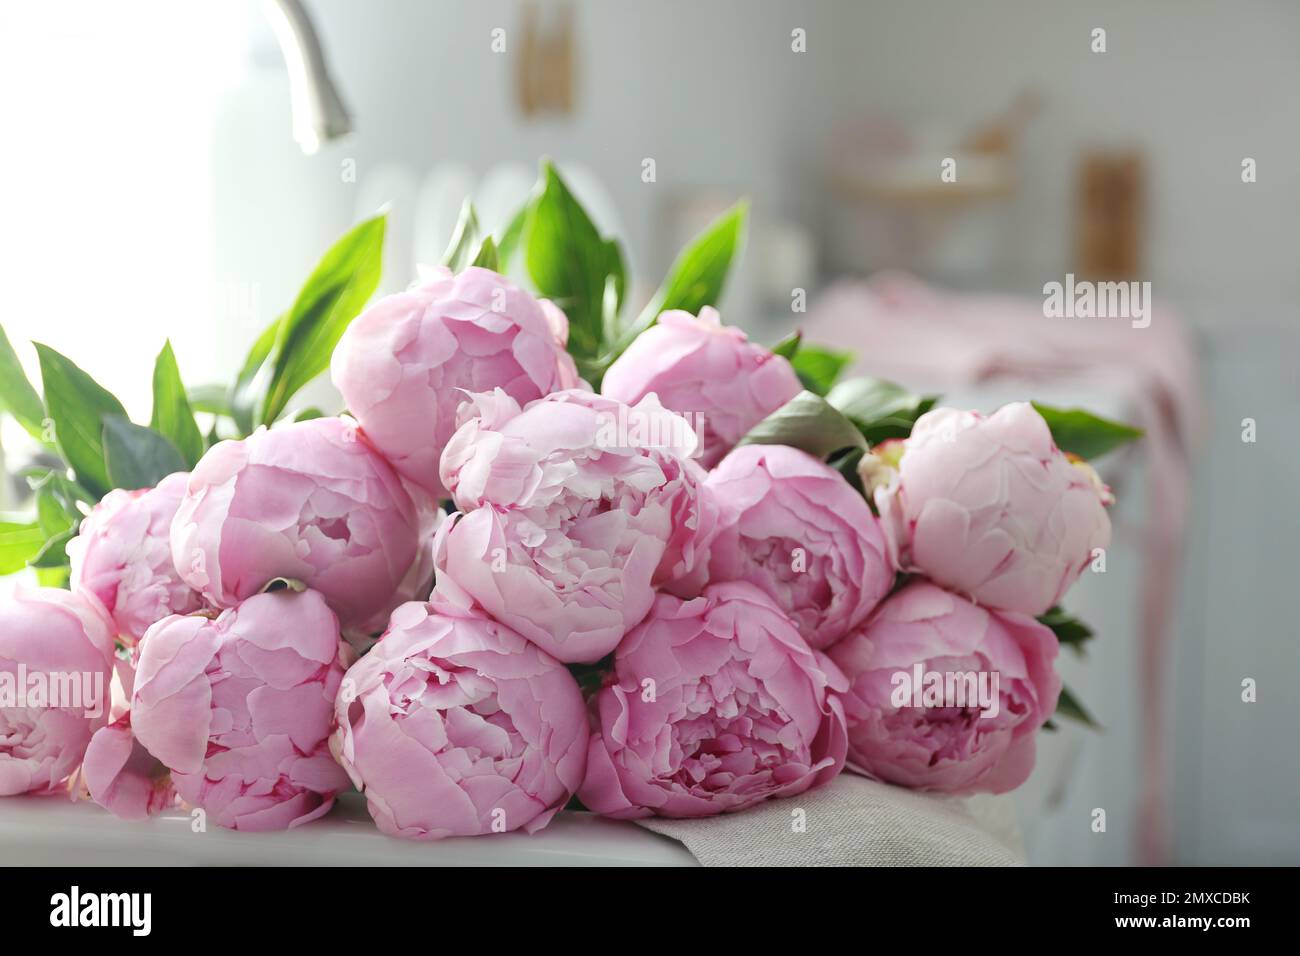 Bouquet of beautiful pink peonies on counter in kitchen Stock Photo